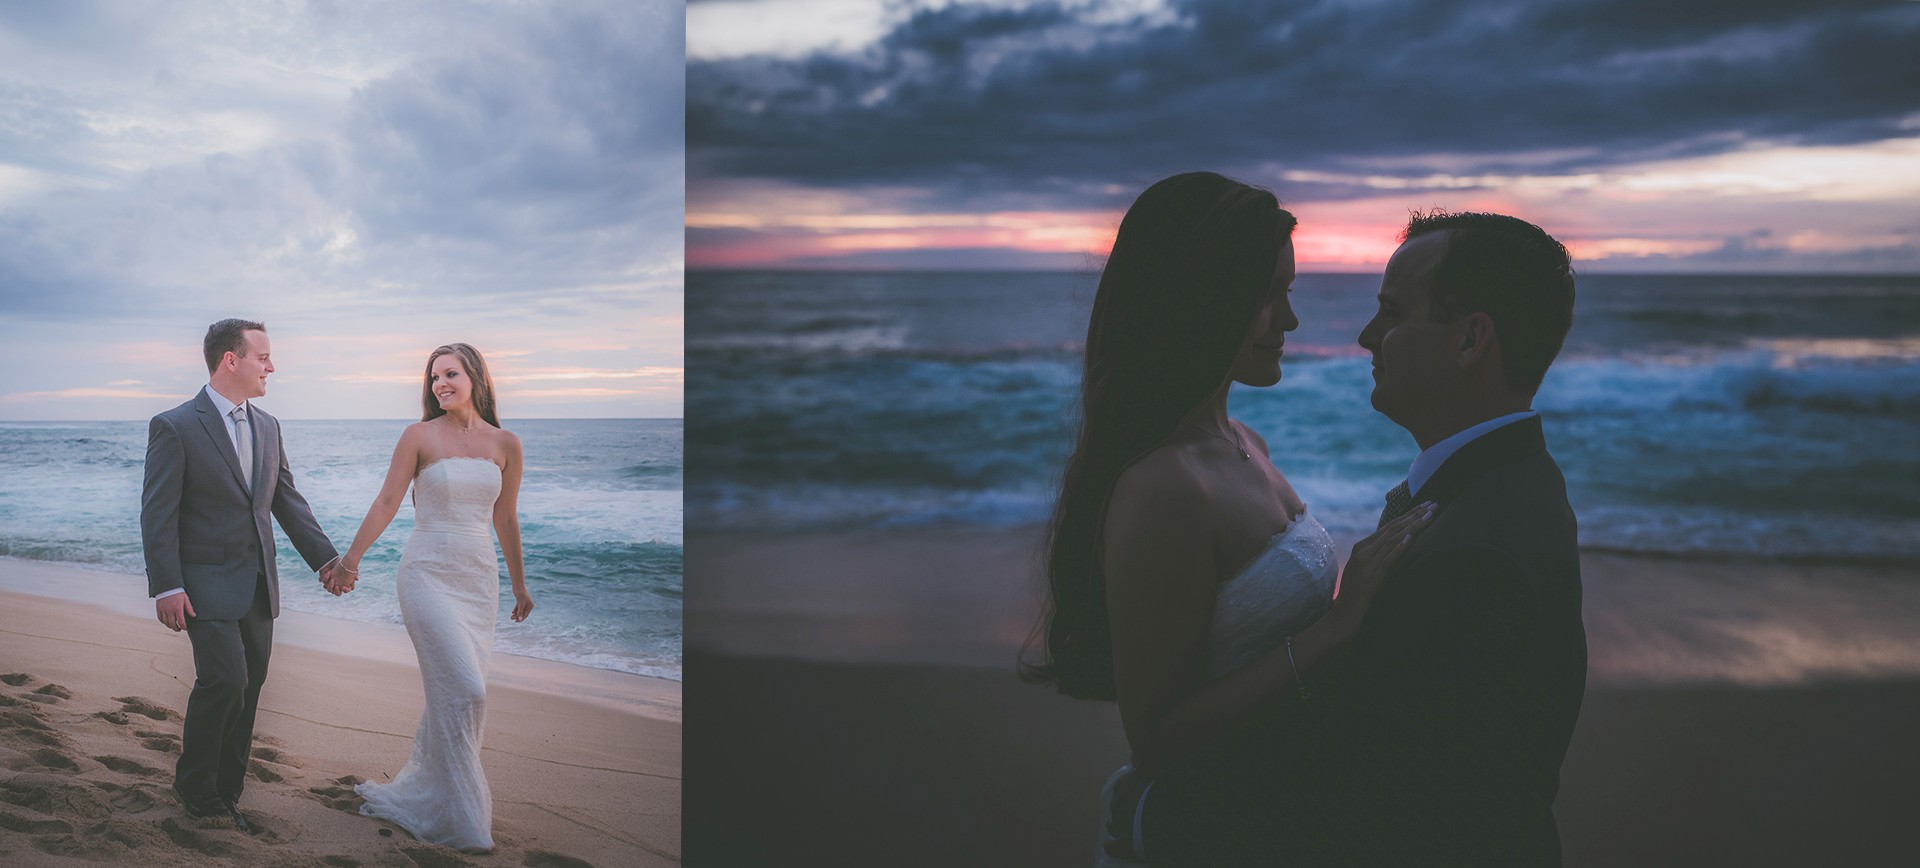 Big Sur Elopement in California - bride and groom at their sunset wedding photos at the beach